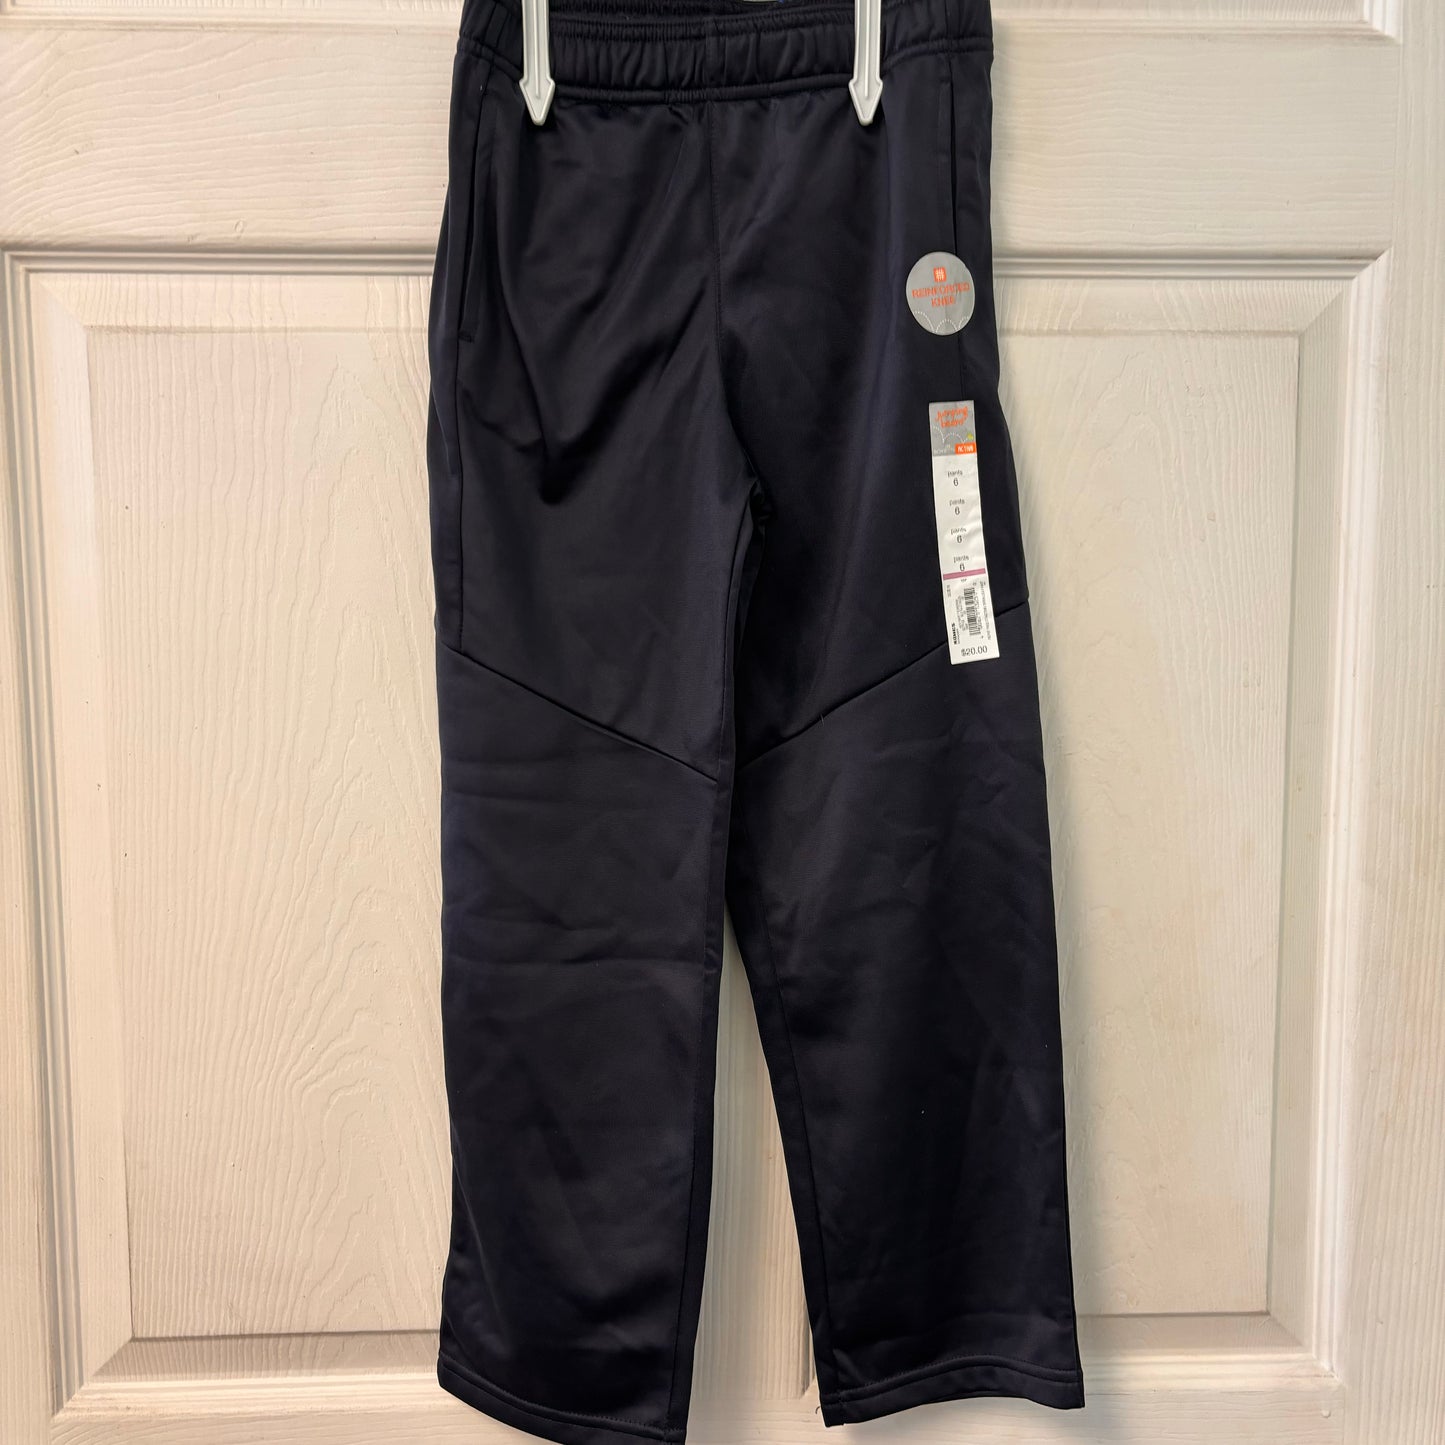 6 New Navy Athletic Pants